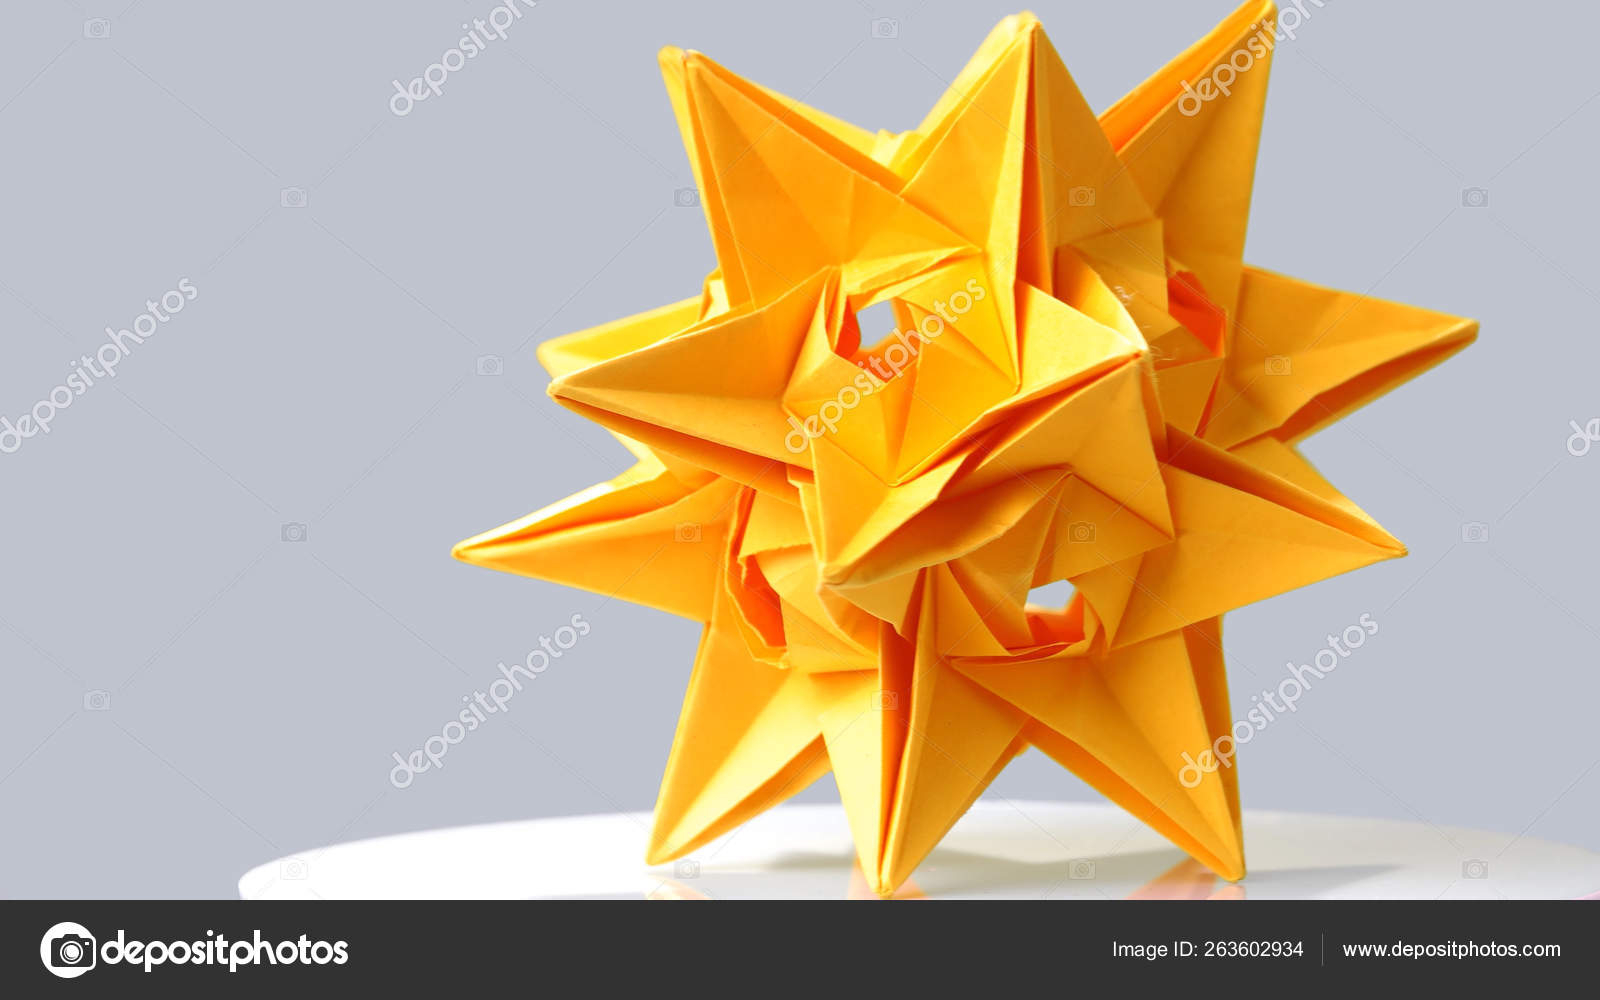 Large Origami Paper Stellated Dodecahedron Origami On Grey Background